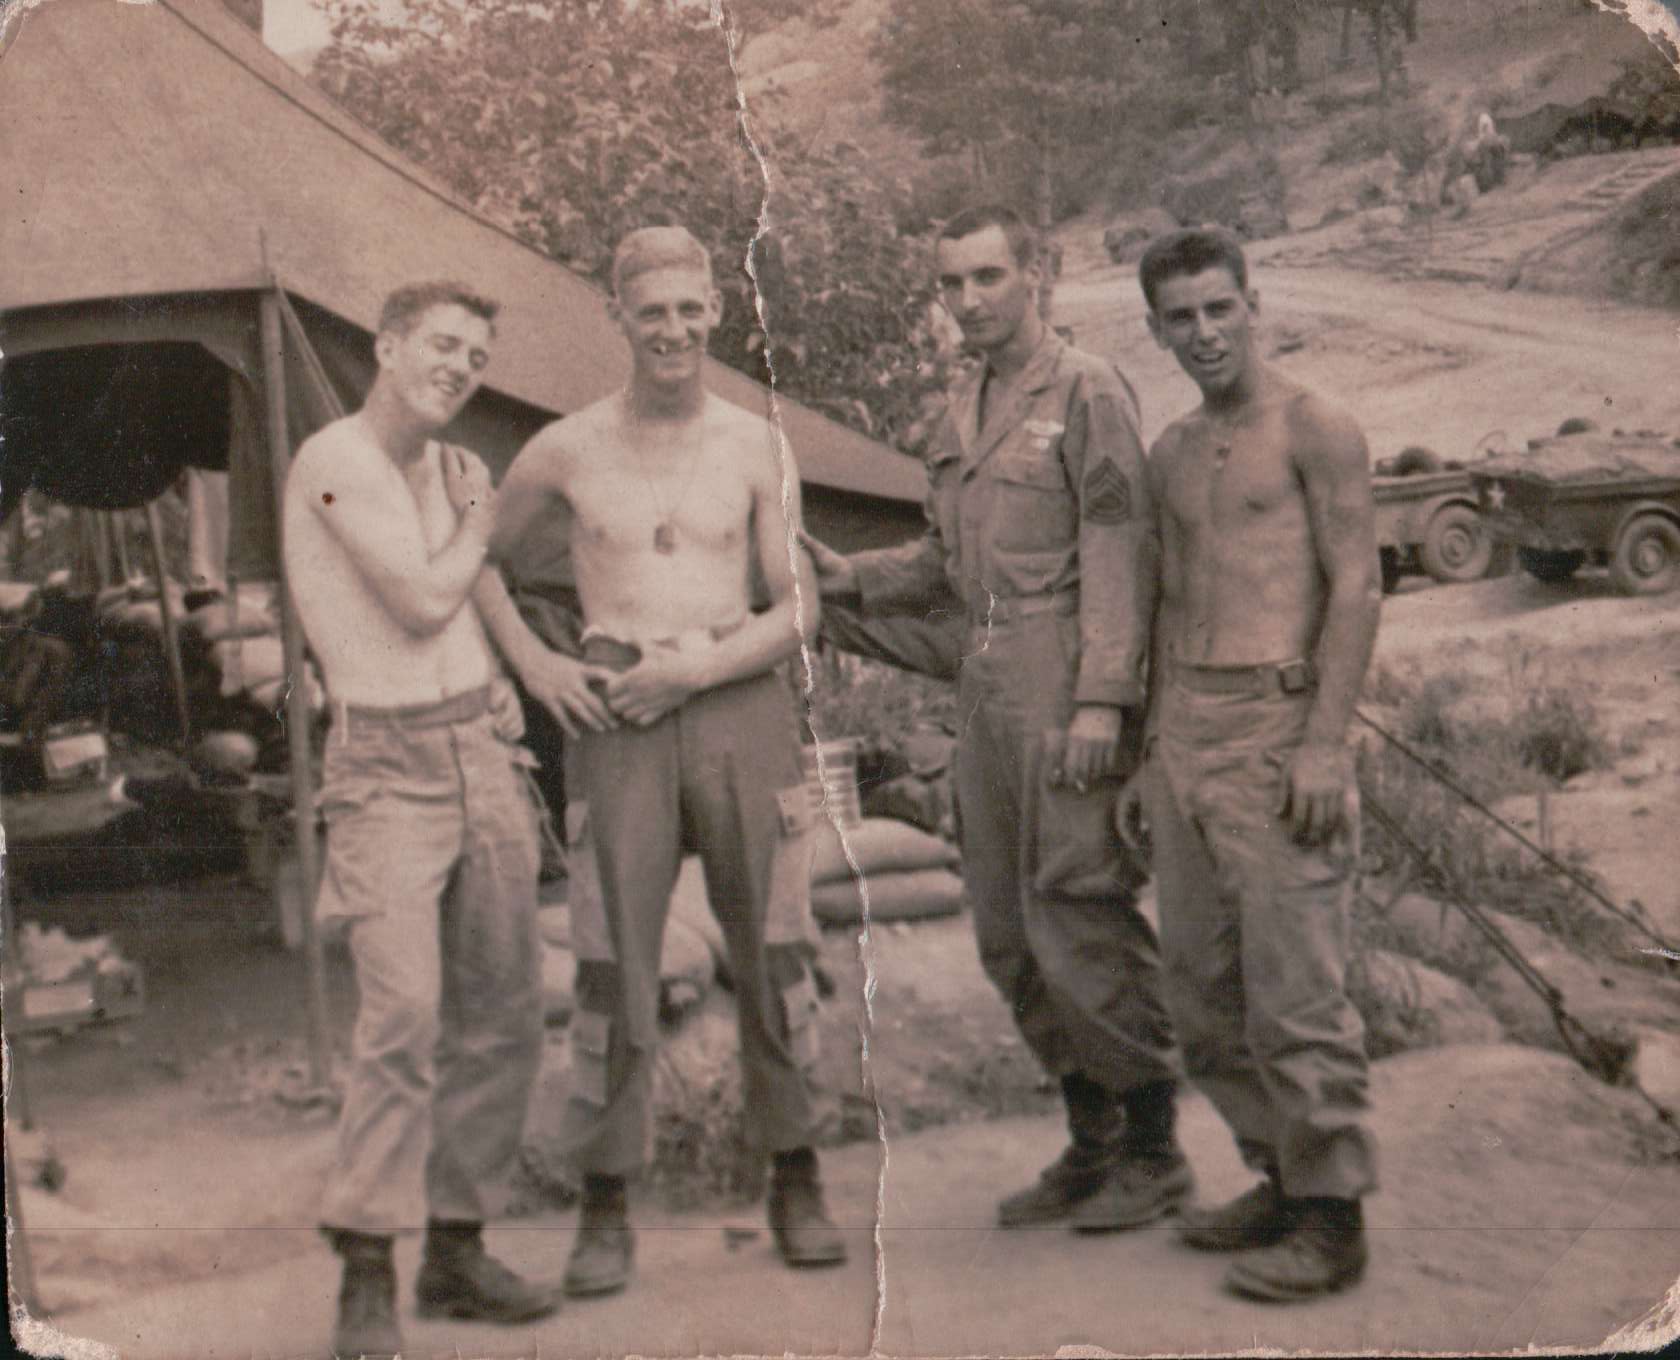 Auletti with friends while off the line in between battles. Taken 1952